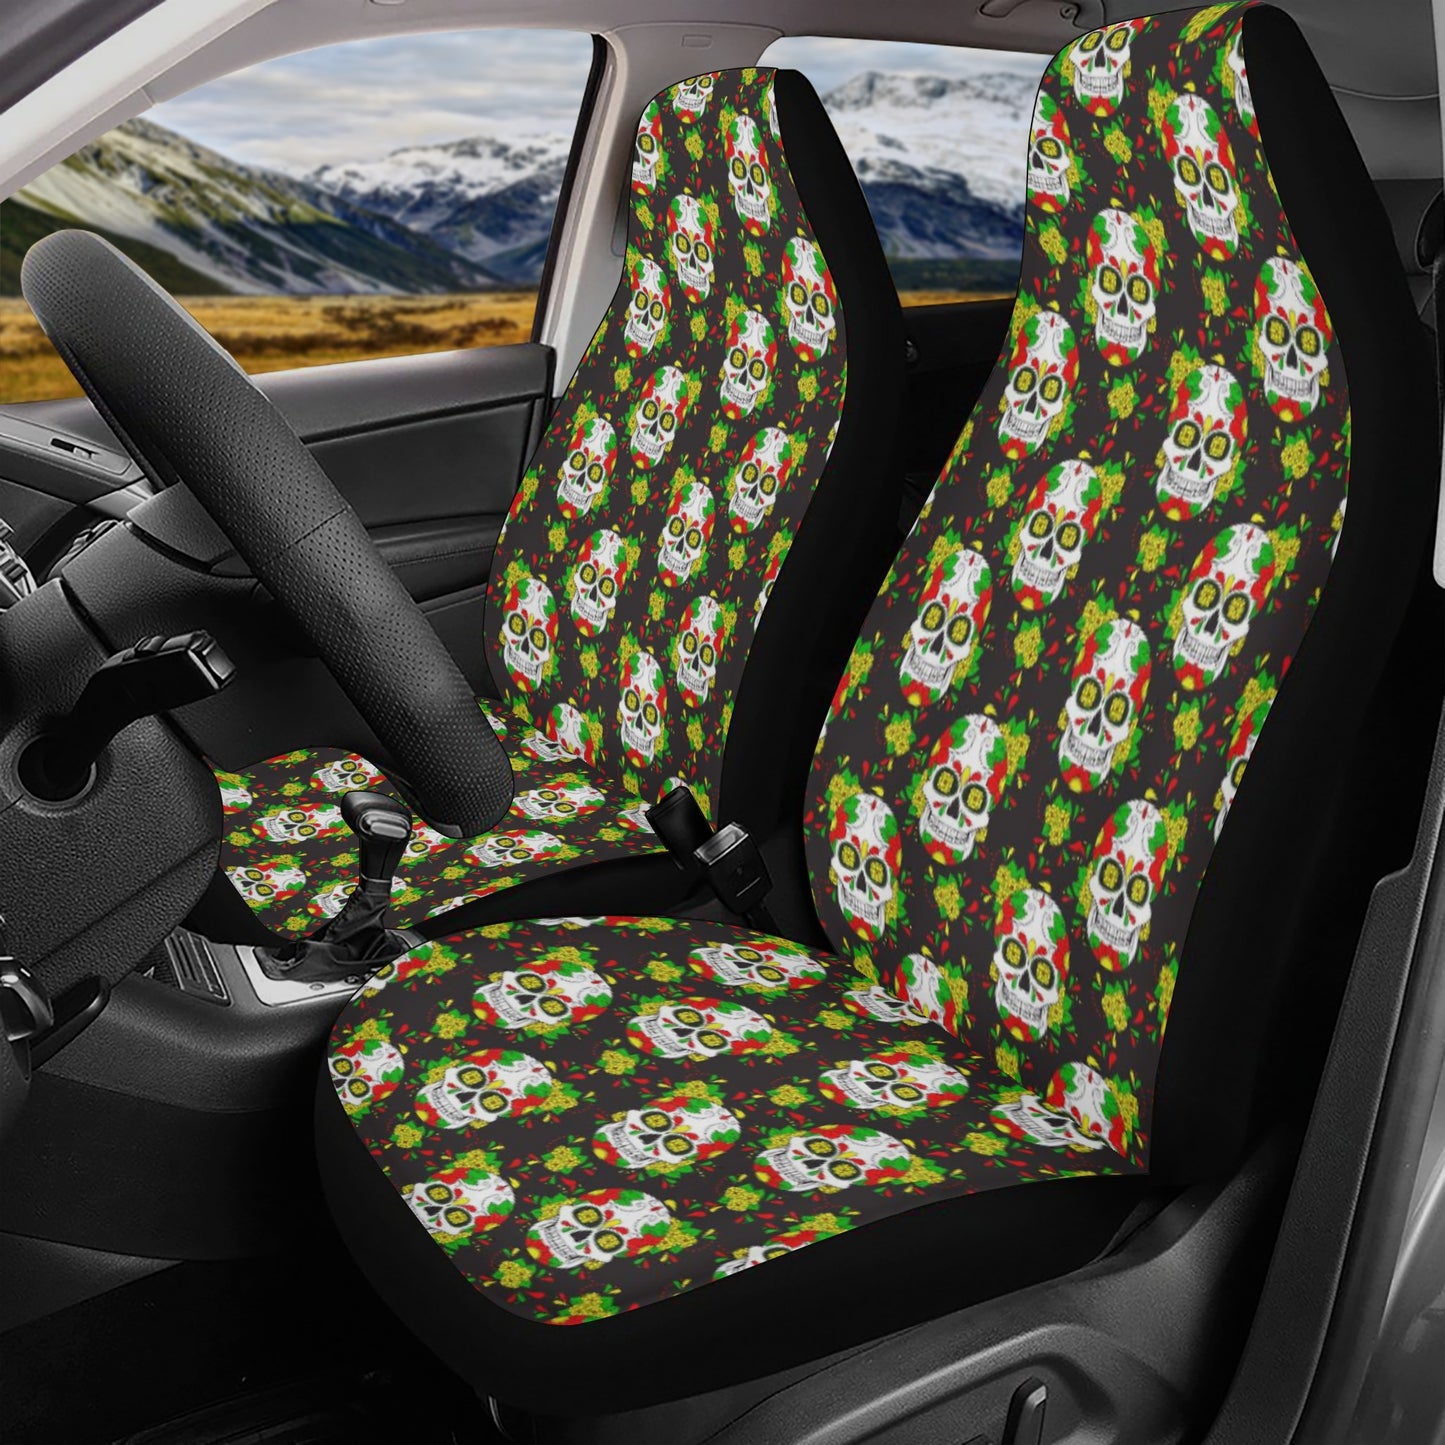 Mexican skull mat for vehicles, mexico washable car seat covers, sugar skull girl seat cover for truck, mexican skull rug mat for car, sugar